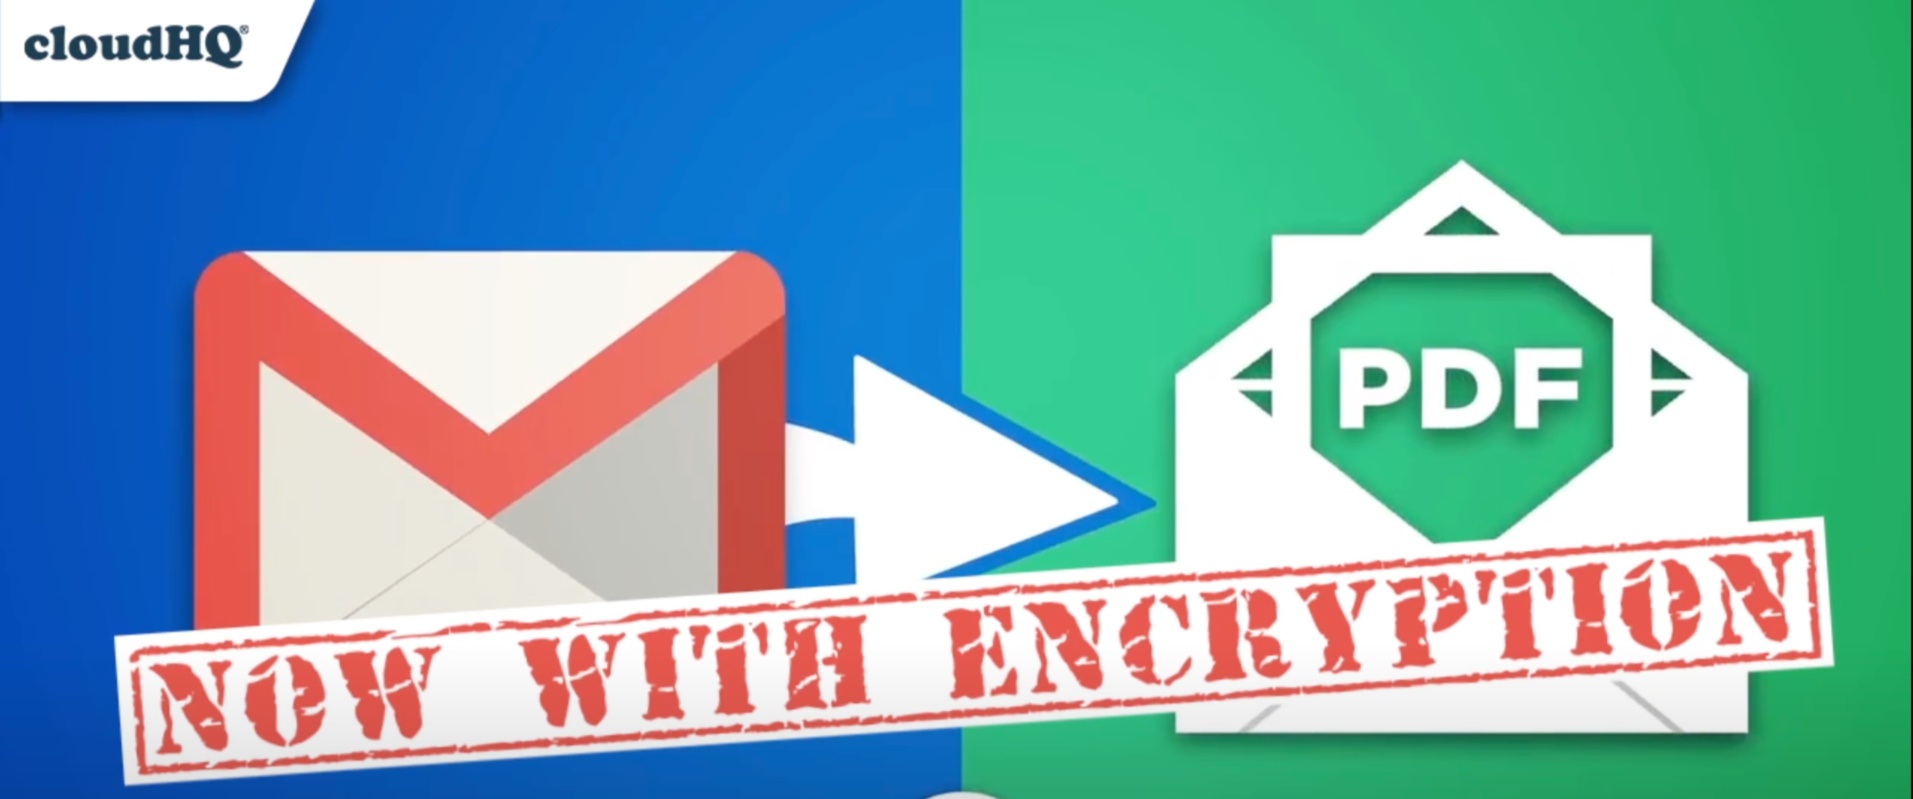 Save your emails as a PDF - and you can encrypt them for security purposes.